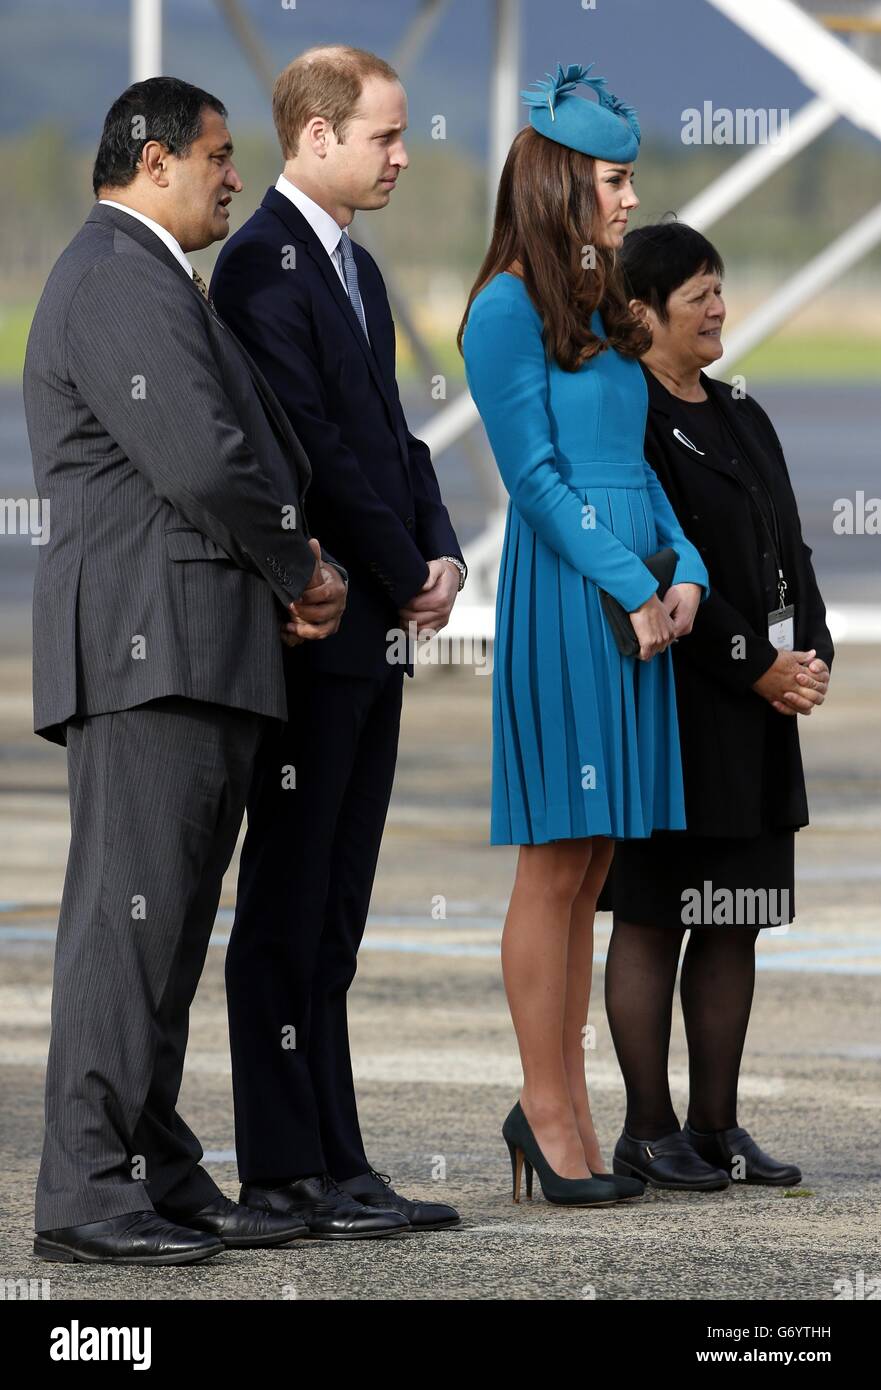 The Duke and Duchess of Cambridge stands with local officials after arriving in Dunedin as they continue their tour of New Zealand. Stock Photo